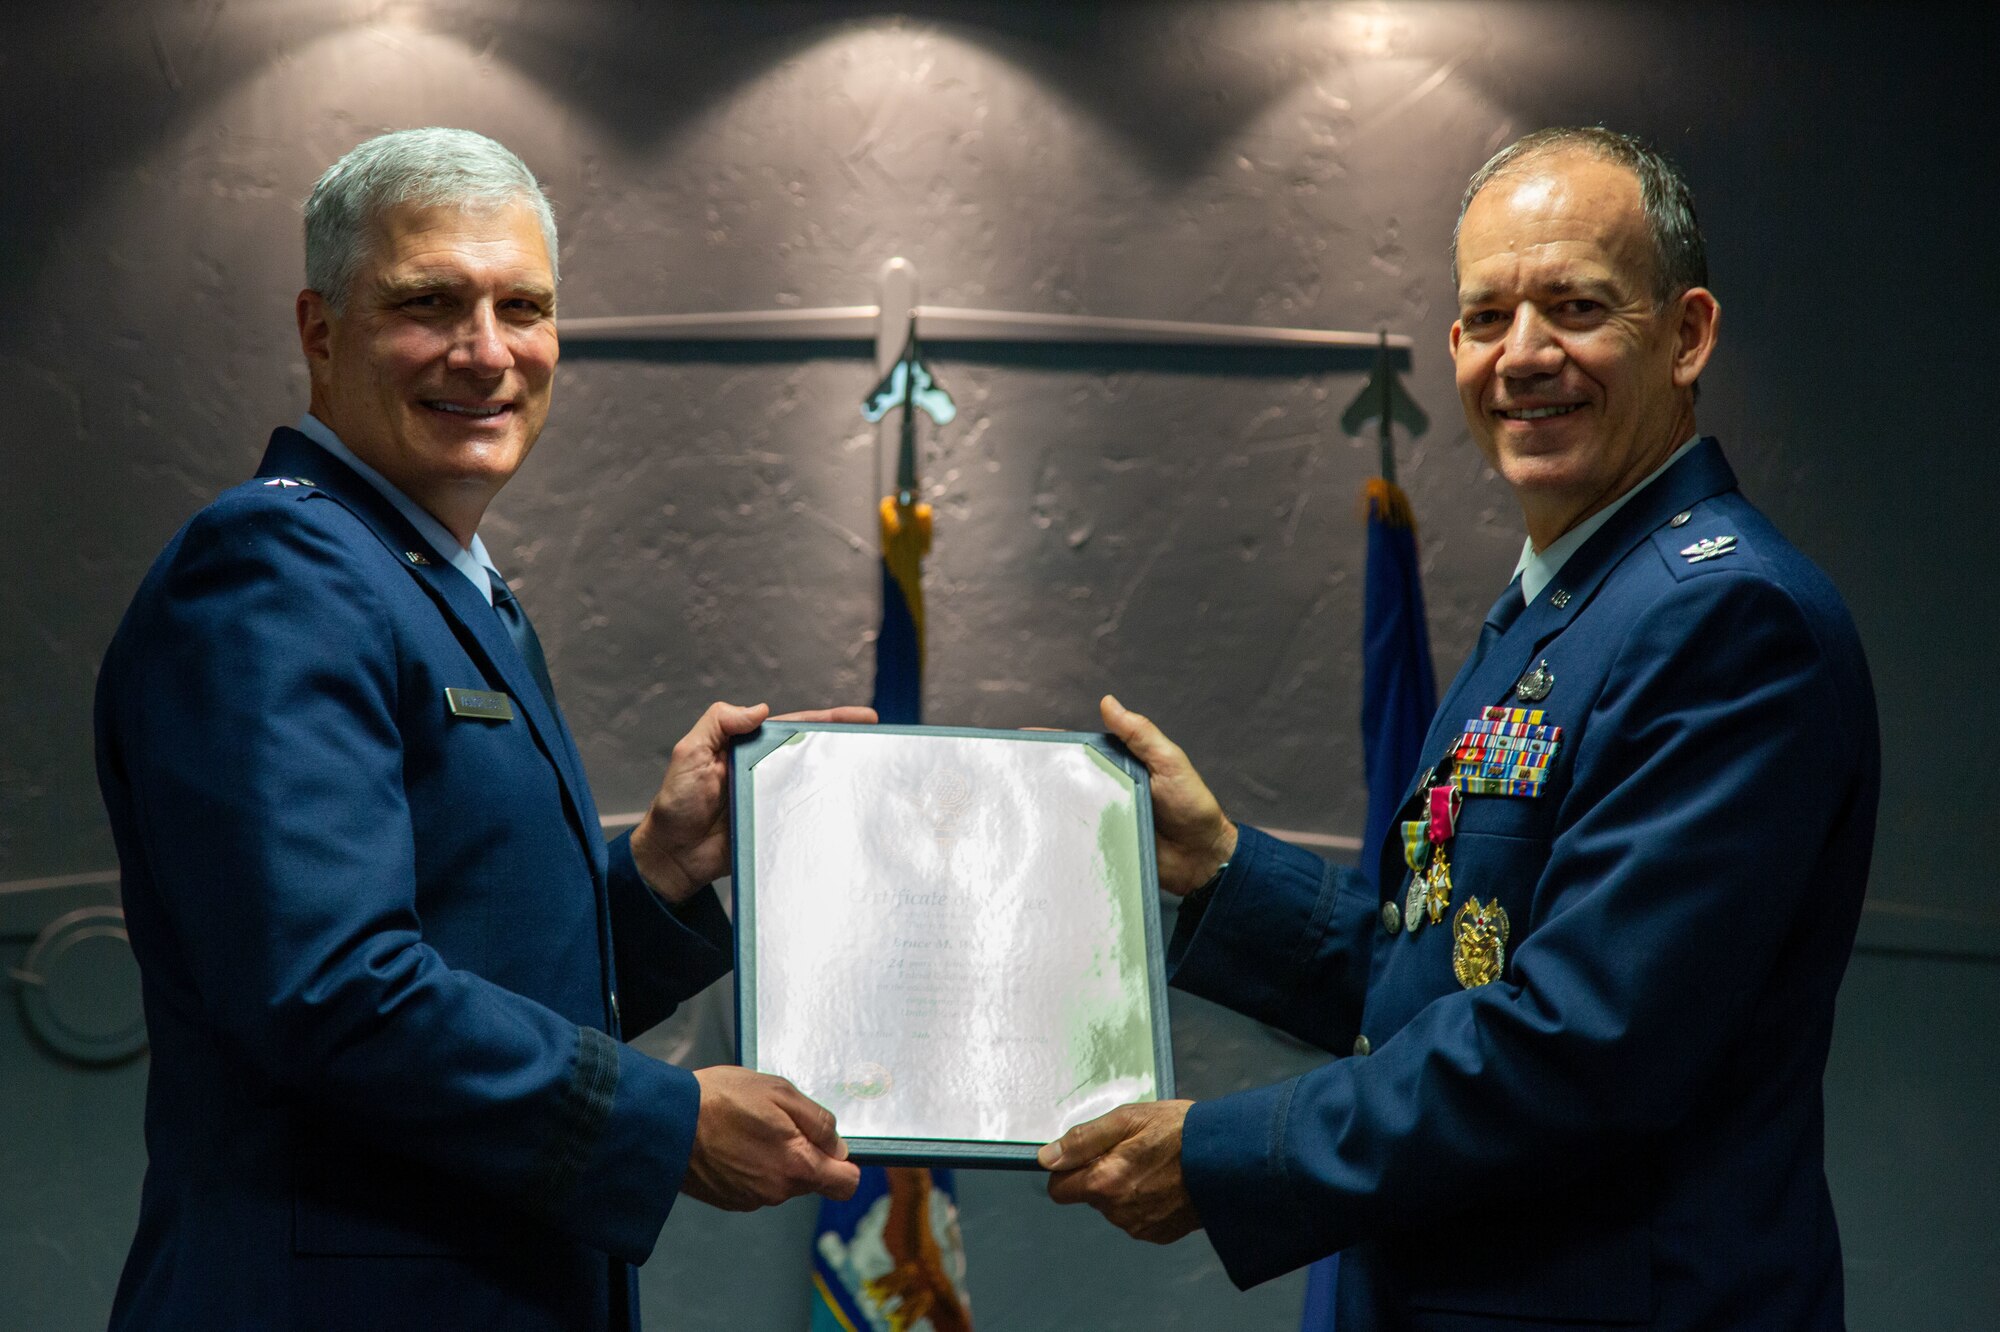 Two airmen hold a certificate.